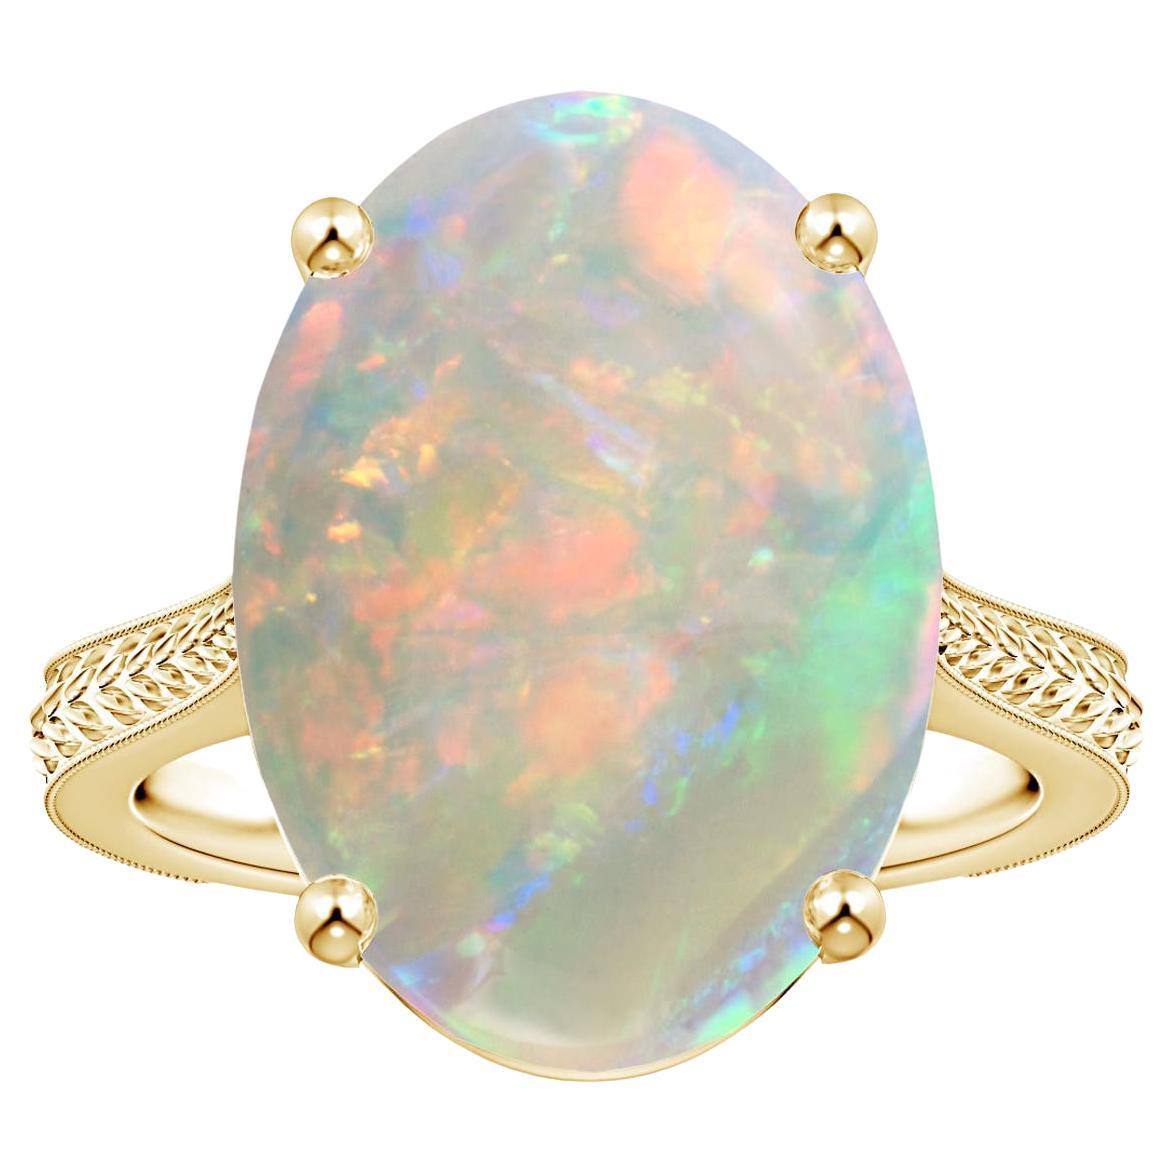 For Sale:  Angara Gia Certified Solitaire Opal Ring in Yellow Gold with Leaf Motifs